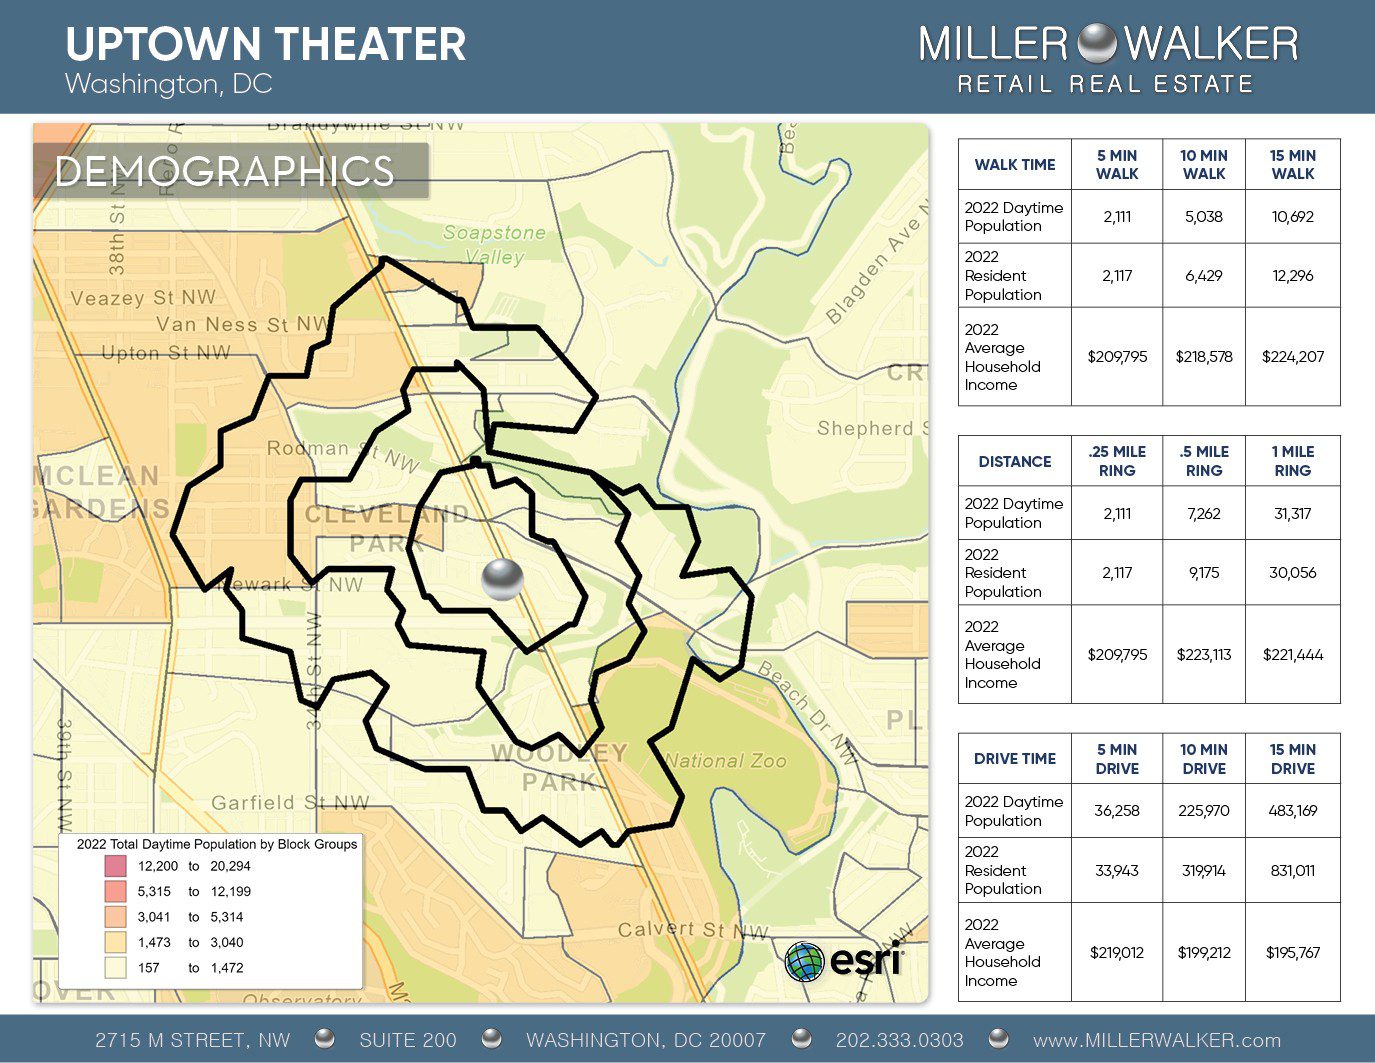 commercial property uptown theater Woodley park - nearby area demographics household income and population